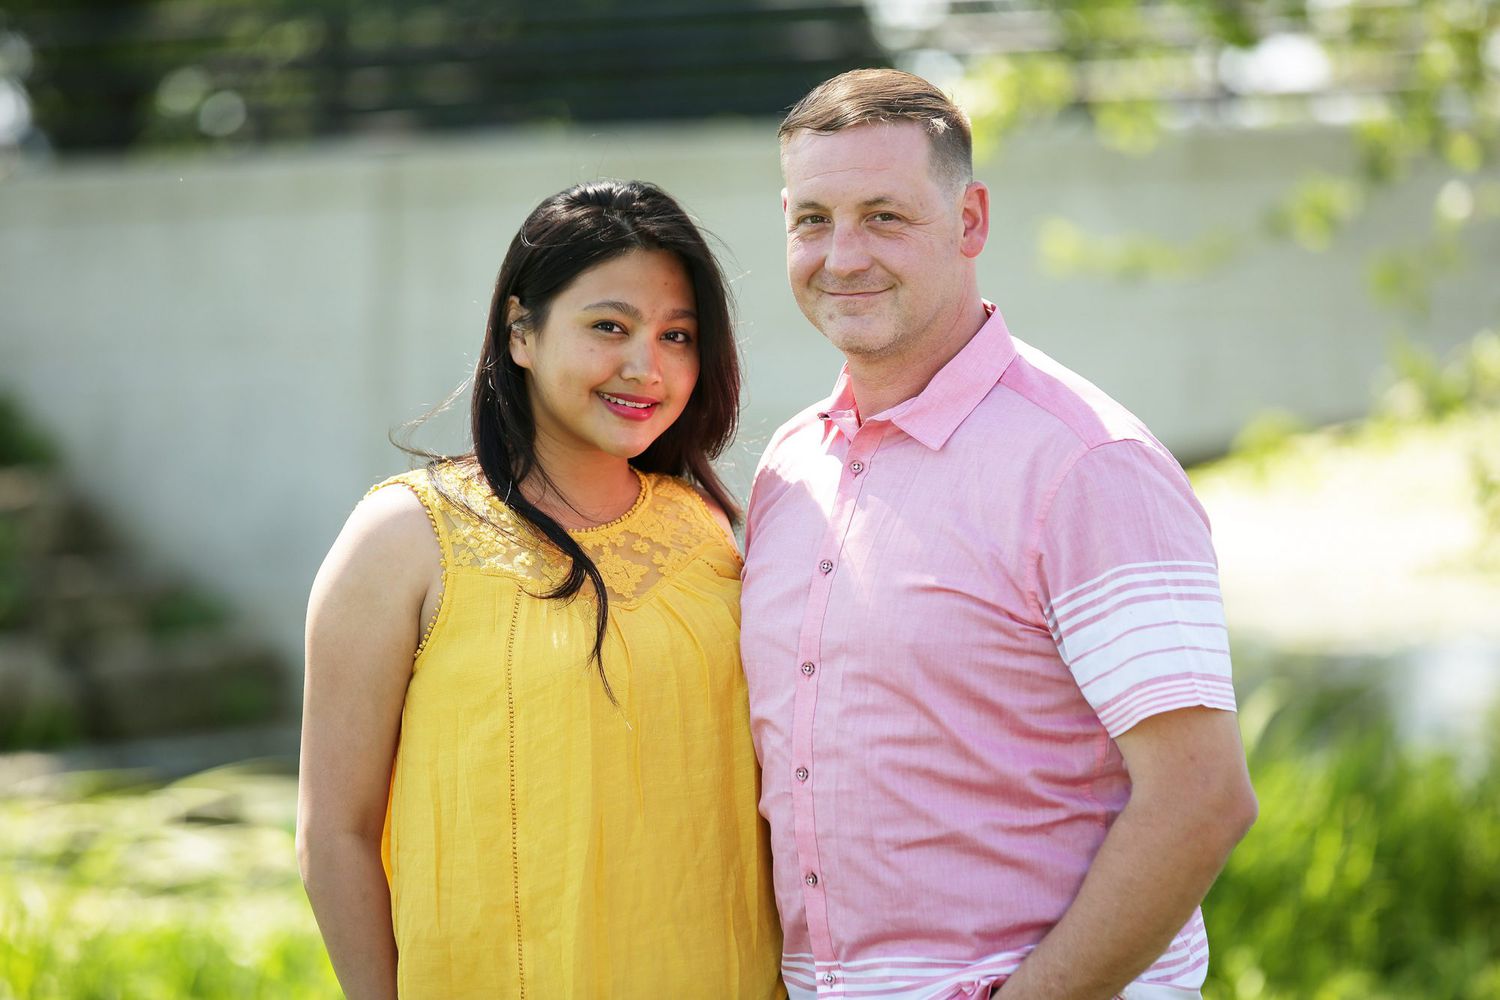 90 Day Fiancé: Police Visit Home of Eric and Leida Rosenbrook amid Abuse Al...